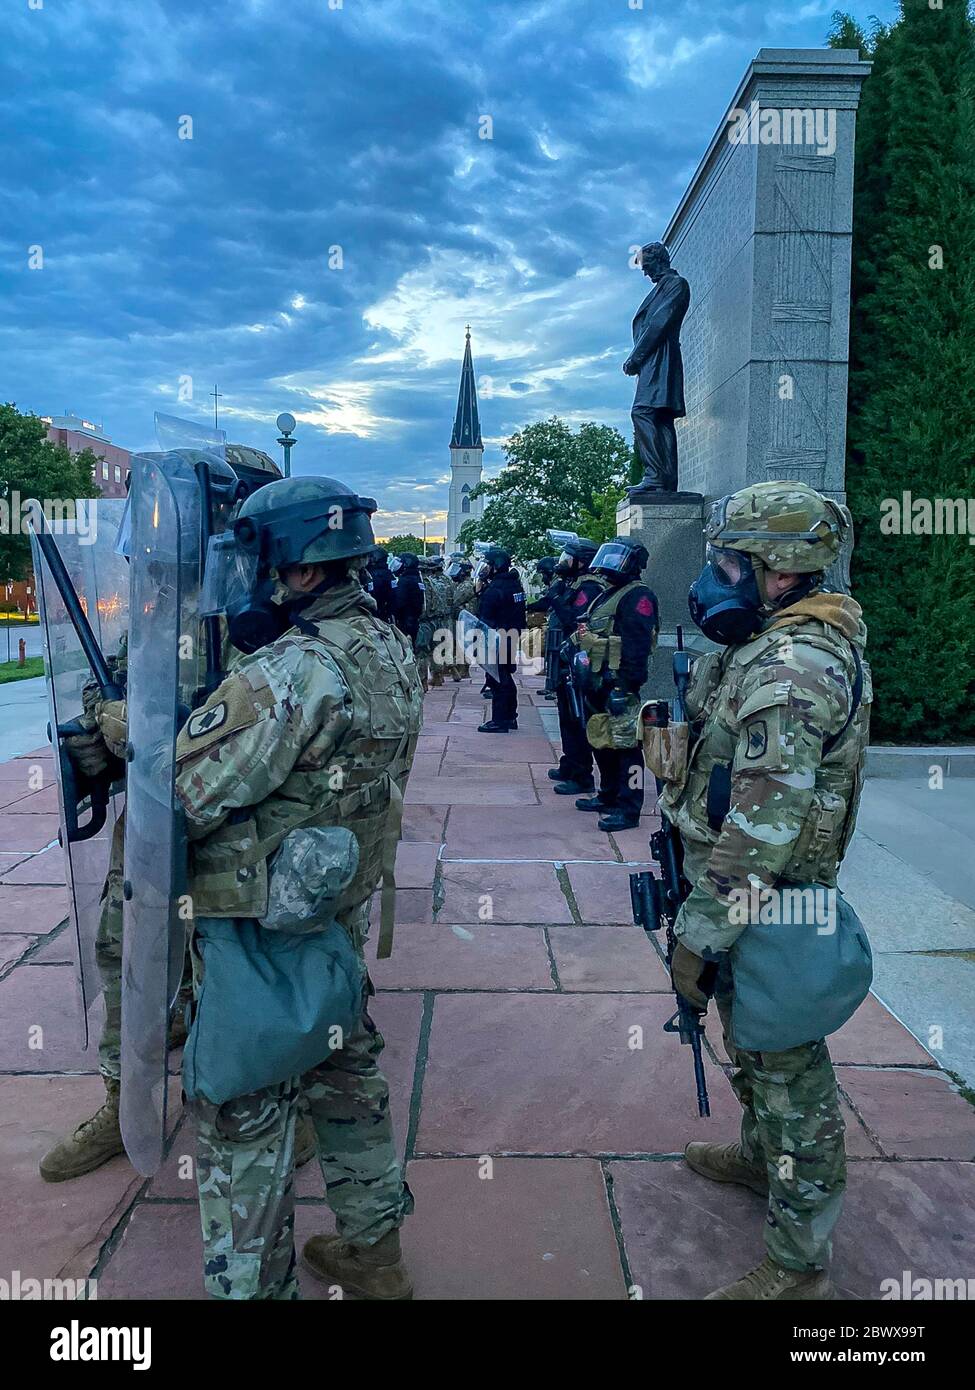 Minnesota National Guardsmen block access the Minnesota State Capitol building following days of protests and riots over the death of George Floyd May 31, 2020 in Saint Paul, Minnesota. Floyd was choked to death by police in Minneapolis resulting in protests sweeping across the nation. Stock Photo